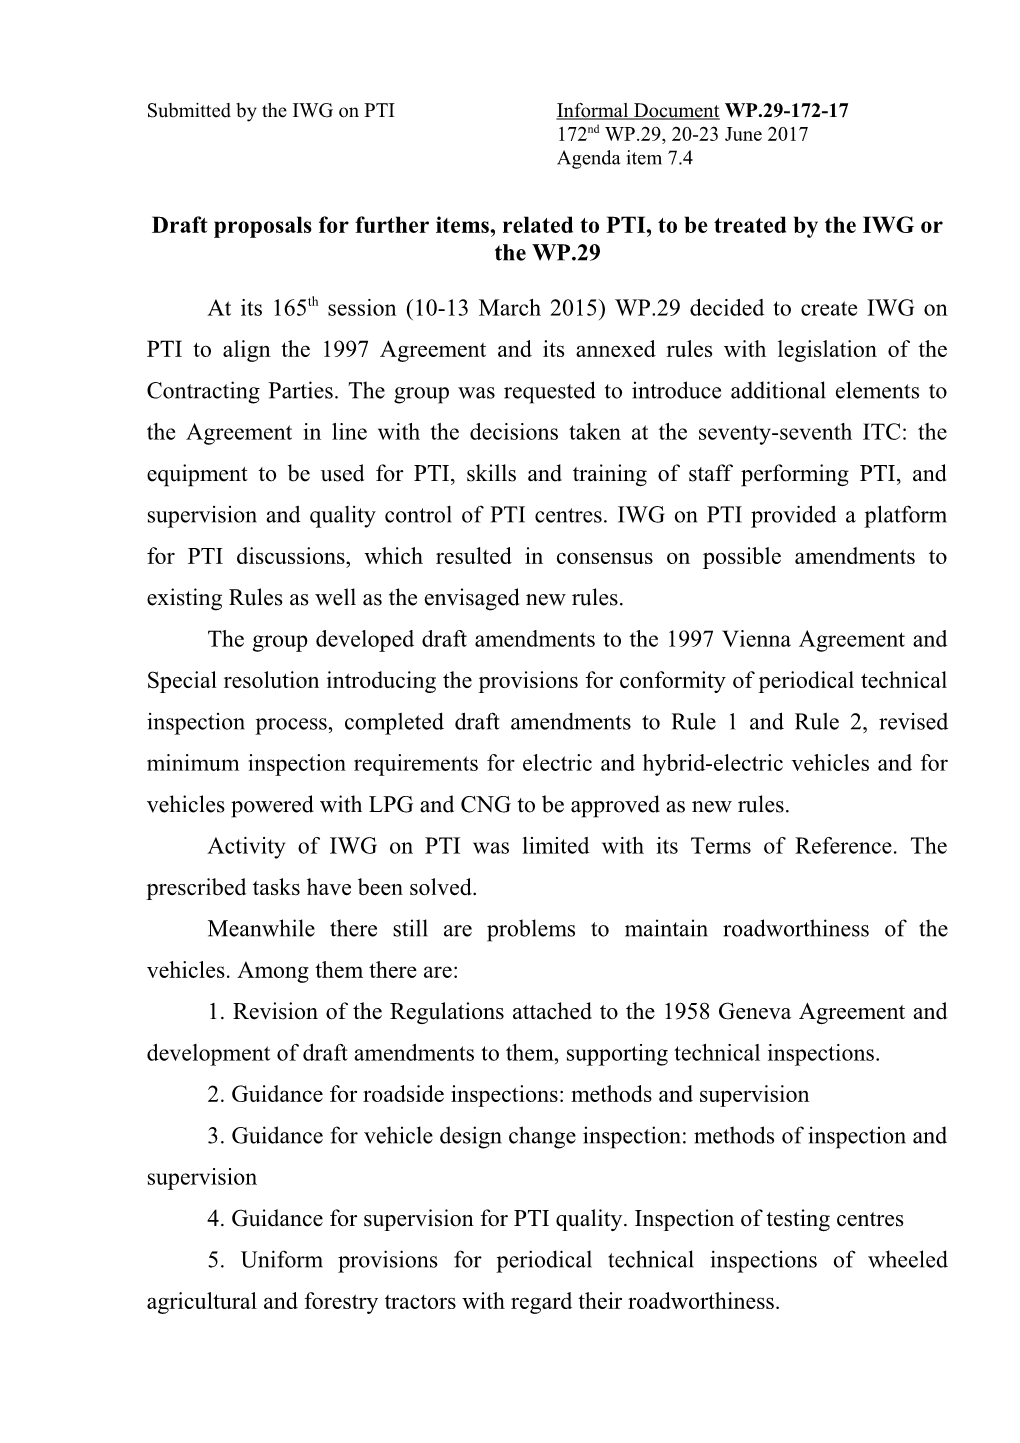 Draft Proposals for Further Items, Related to PTI, to Be Treated by the IWG Or the WP.29